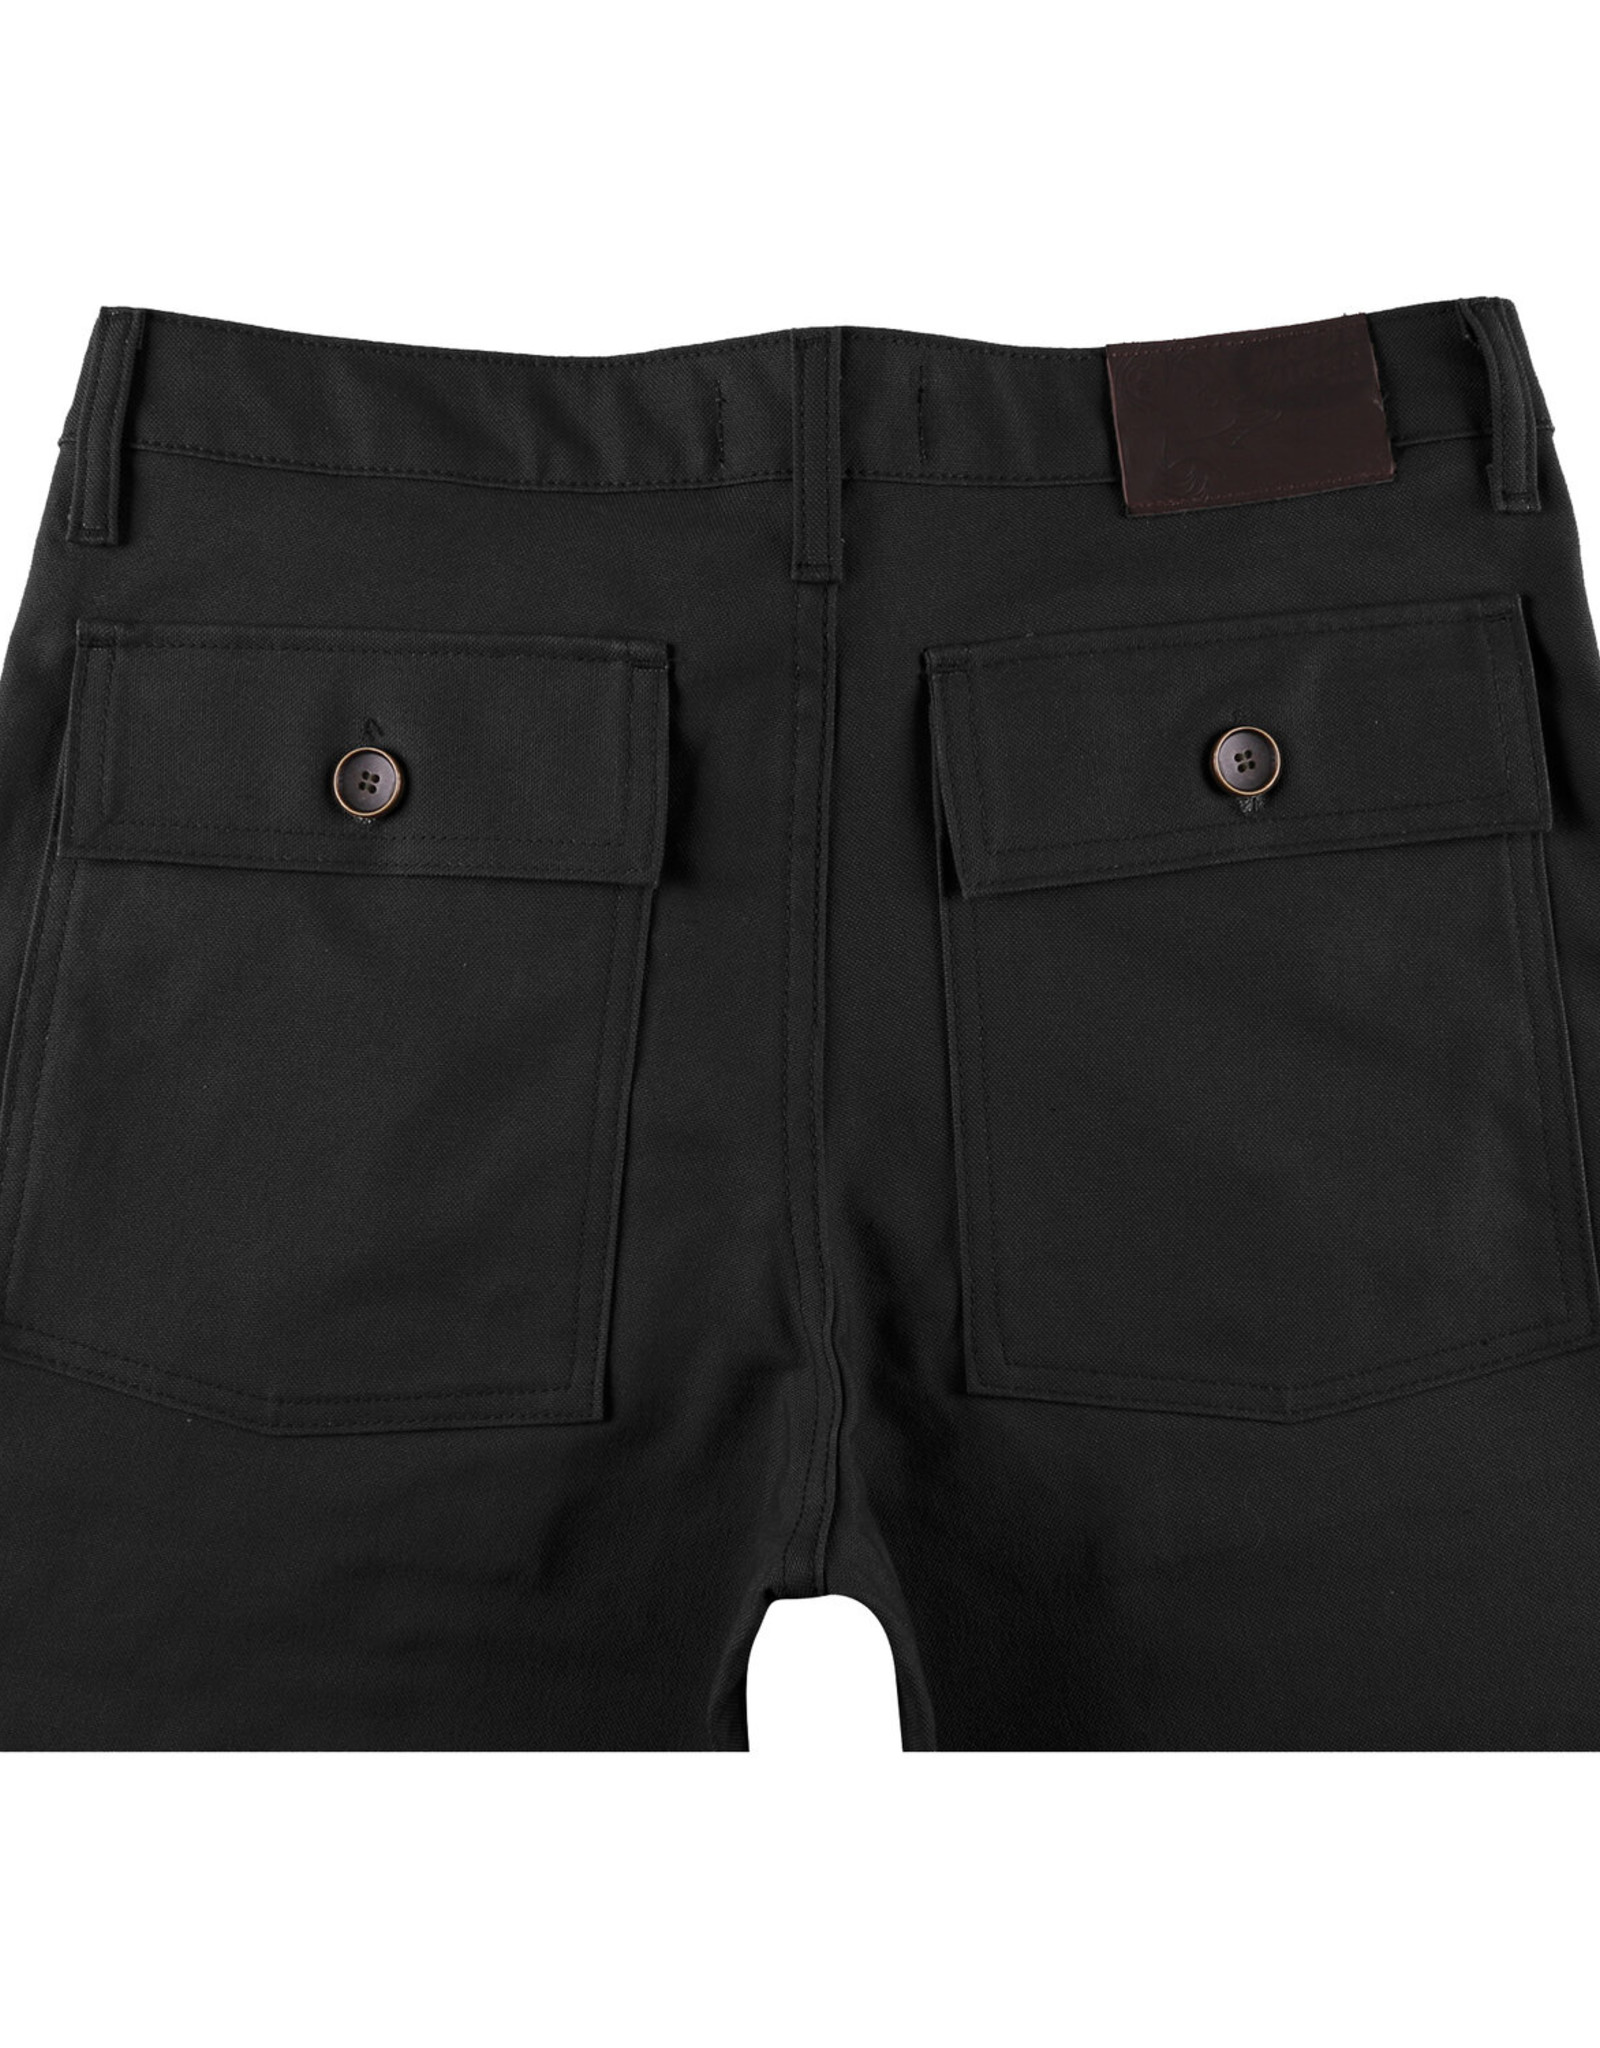 Naked & Famous - Work Pant - Black Canvas